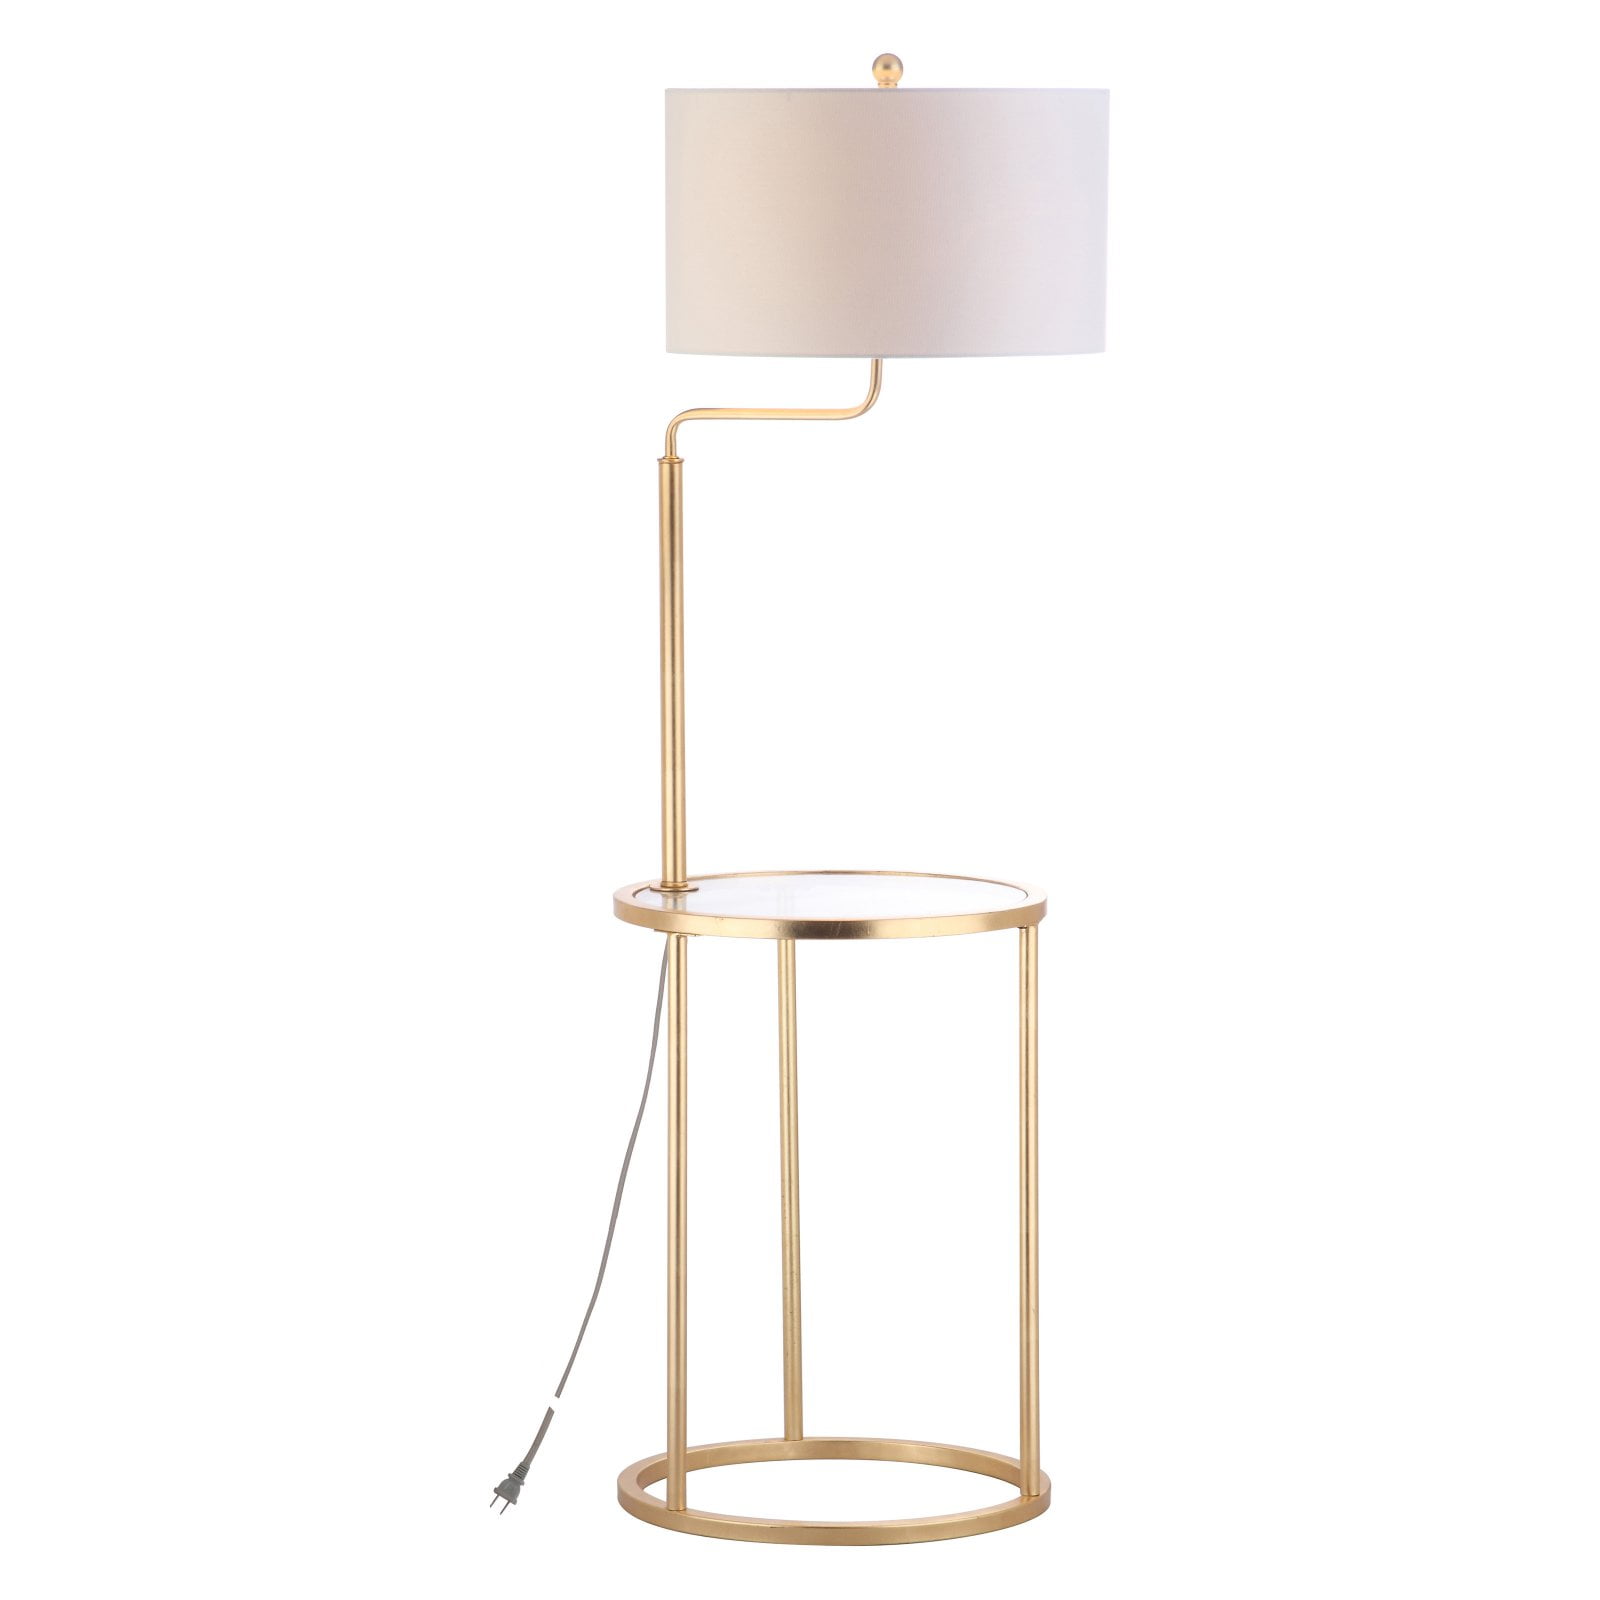 H Duo Floor Lamp Side Table Gold, Floor Lamp With Glass Table Attached